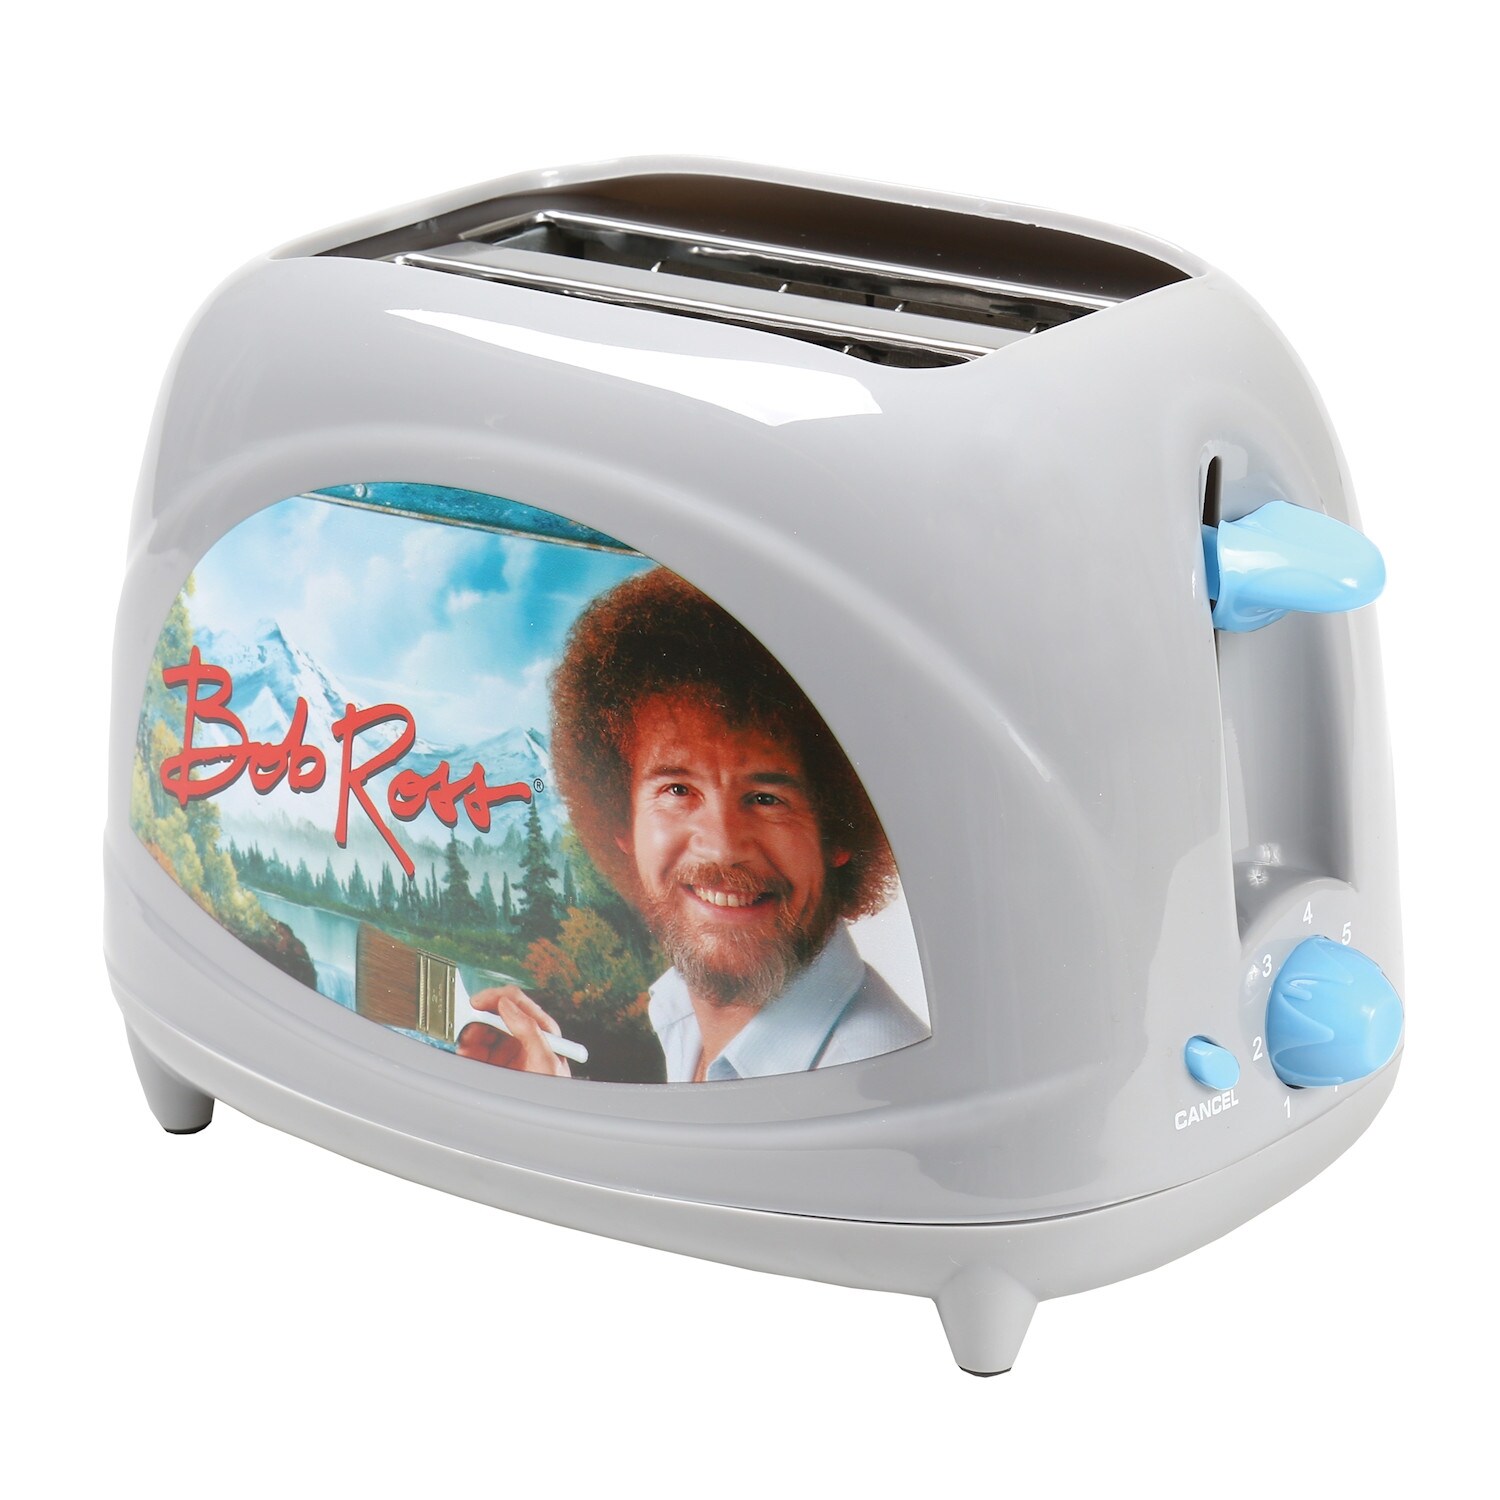 https://ak1.ostkcdn.com/images/products/is/images/direct/ac874051640ce3a6125052dc5b5589f2185e4bb2/Bob-Ross-Toaster---Toasts-Bob%27s-Iconic-Face-onto-Your-Toast.jpg